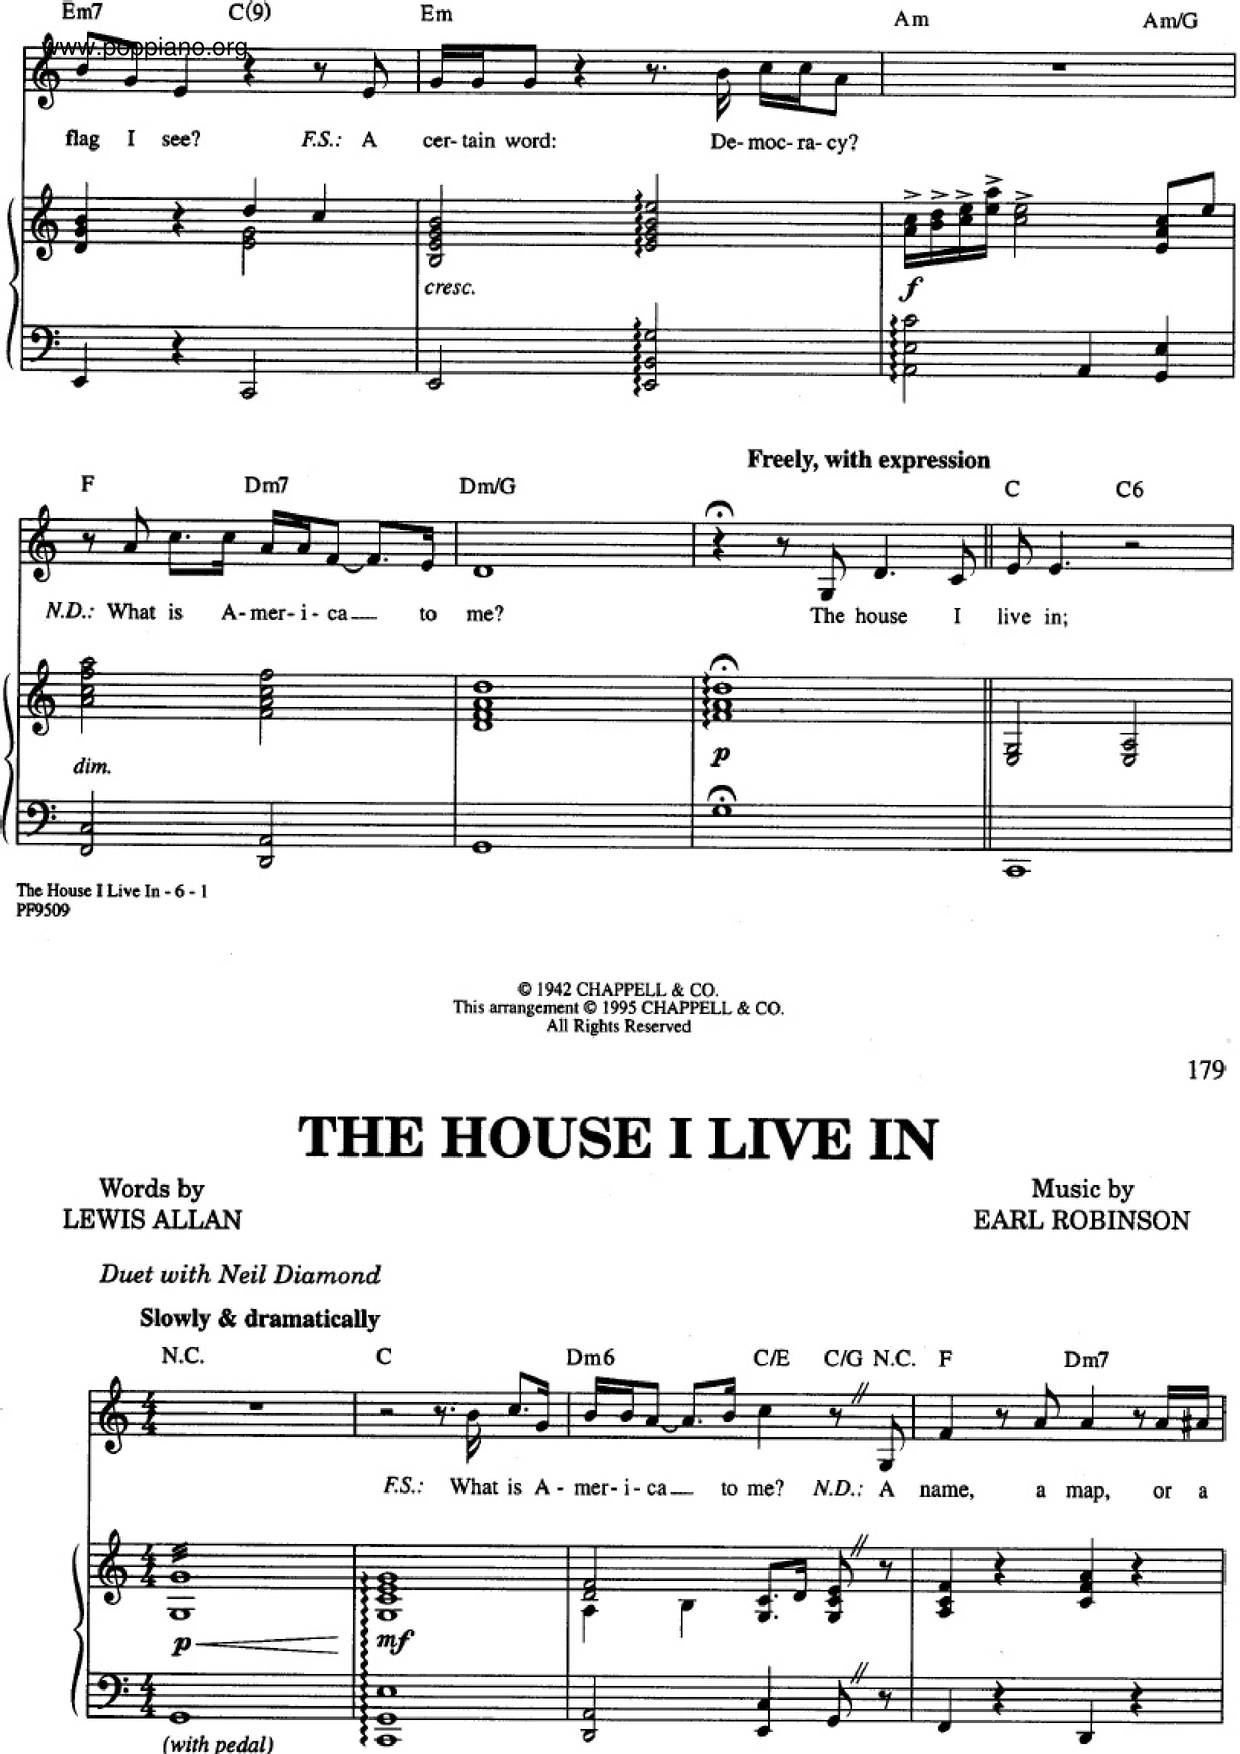 The House I Live In Score